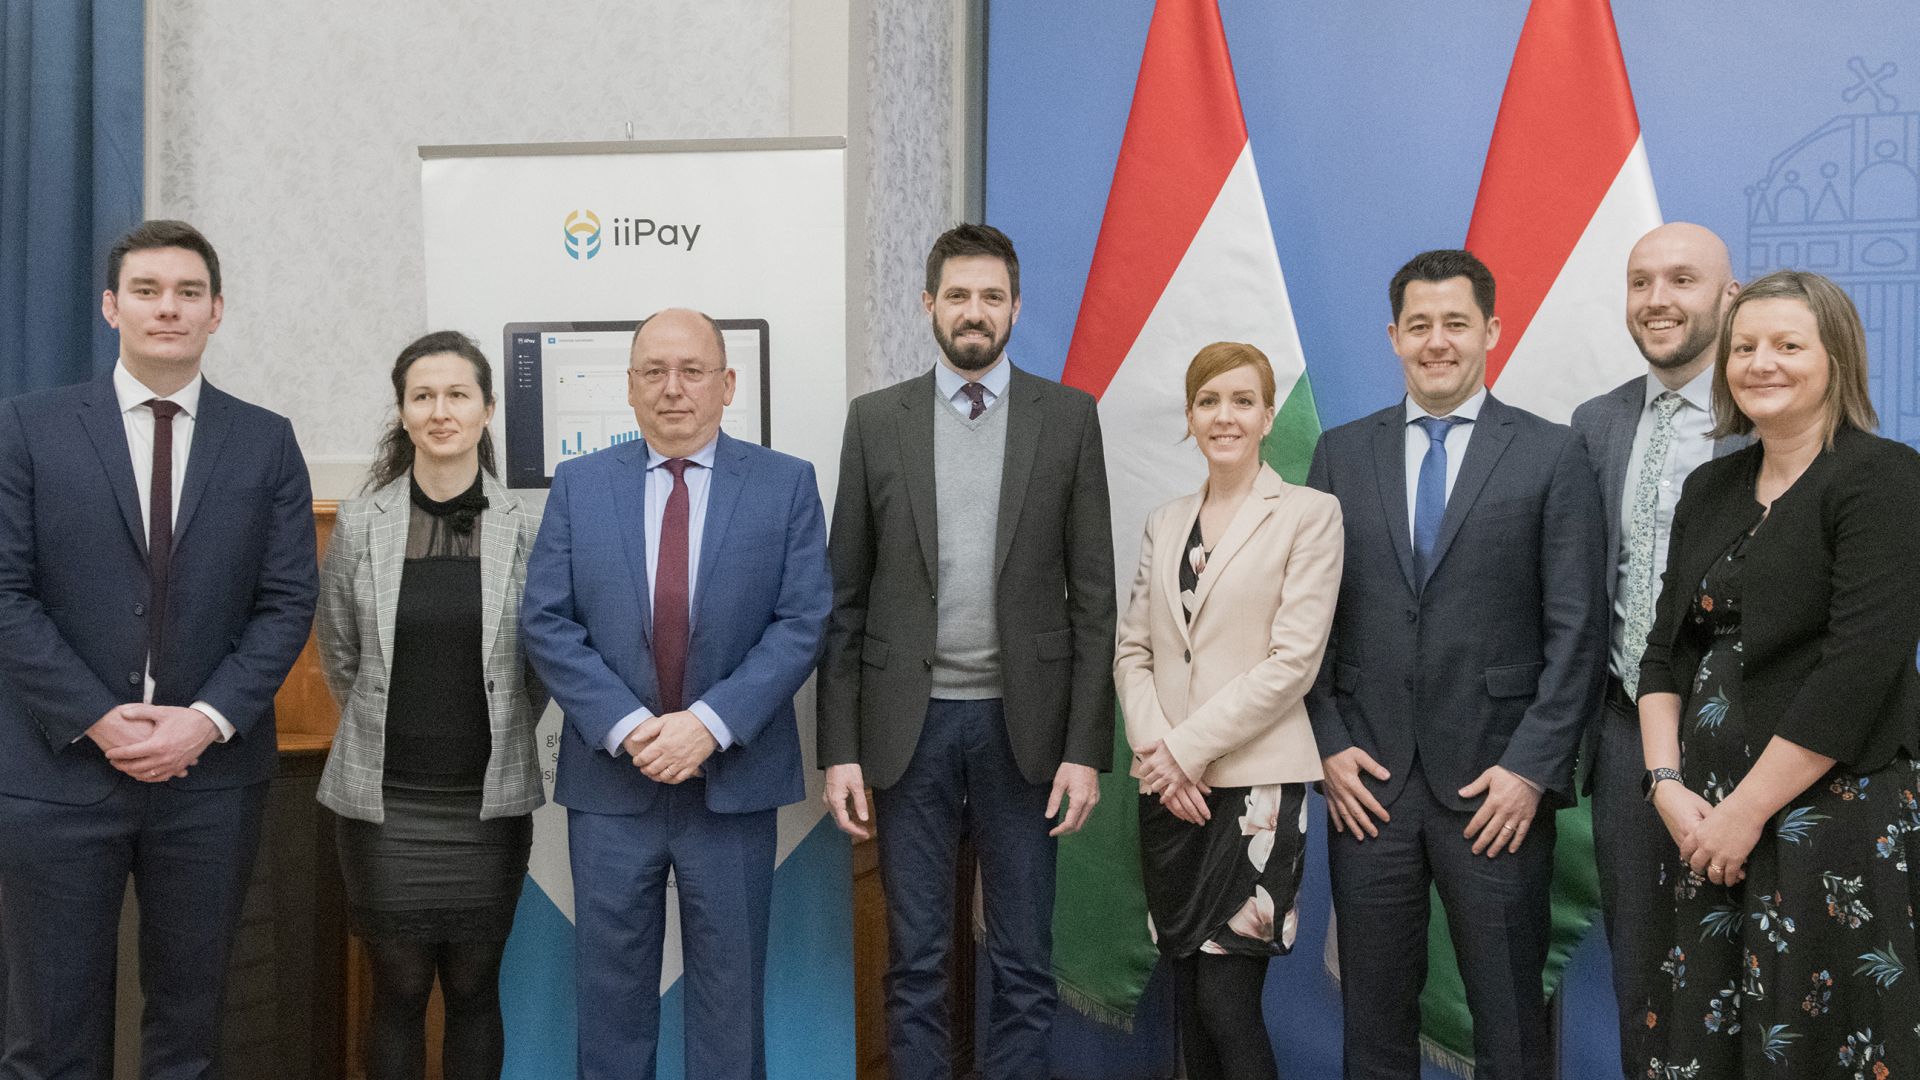 Representatives of iiPay and Levente Magyar, Deputy Minister of Foreign Affairs and Trade